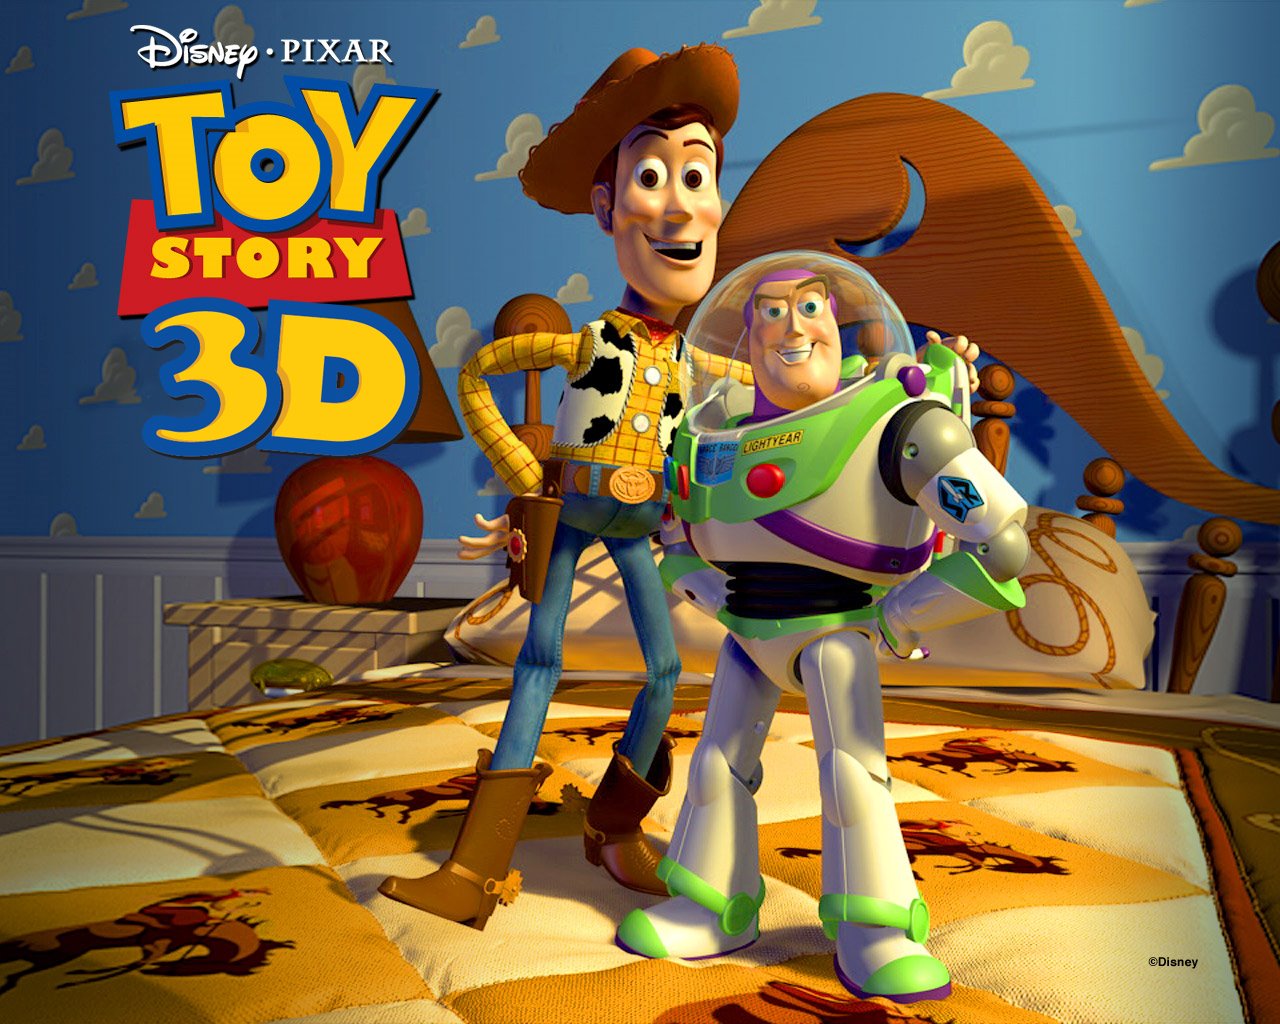 Disney Pixar’s Toy Story 1 & 2 in 3D Review